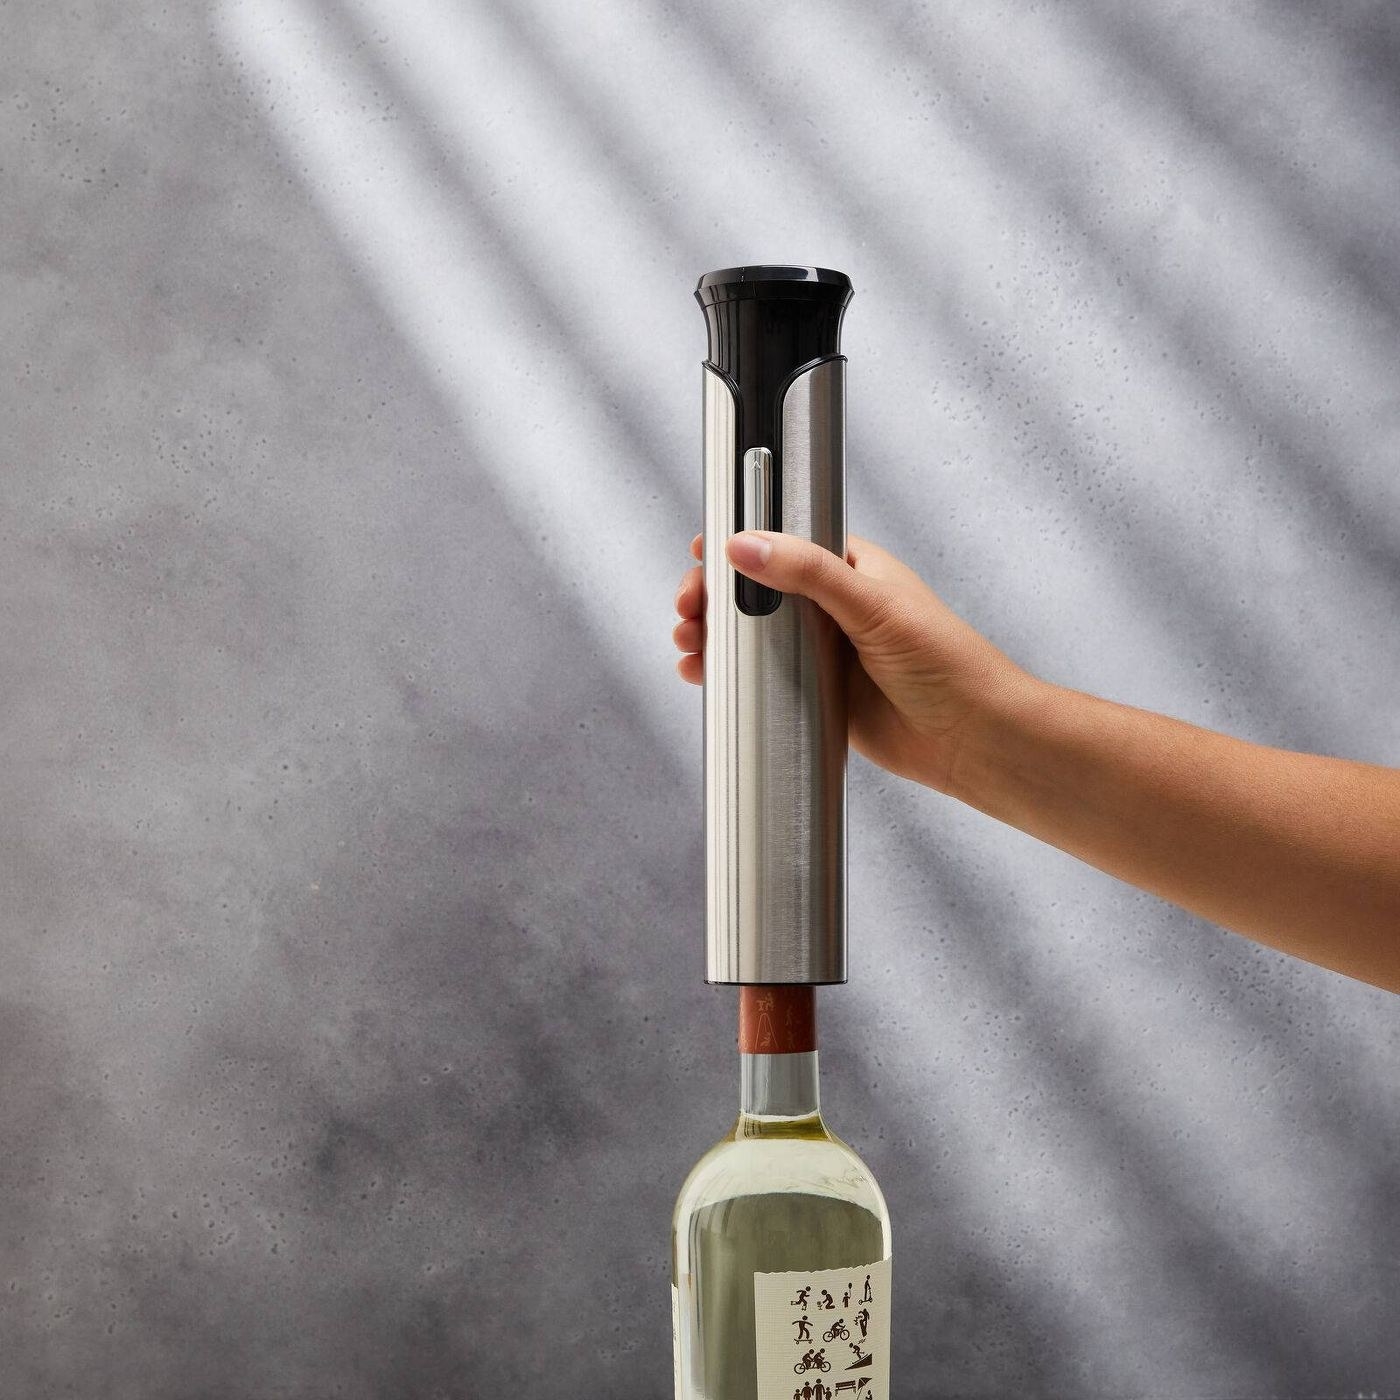 a person holding the electric corkscrew over a bottle of white wine